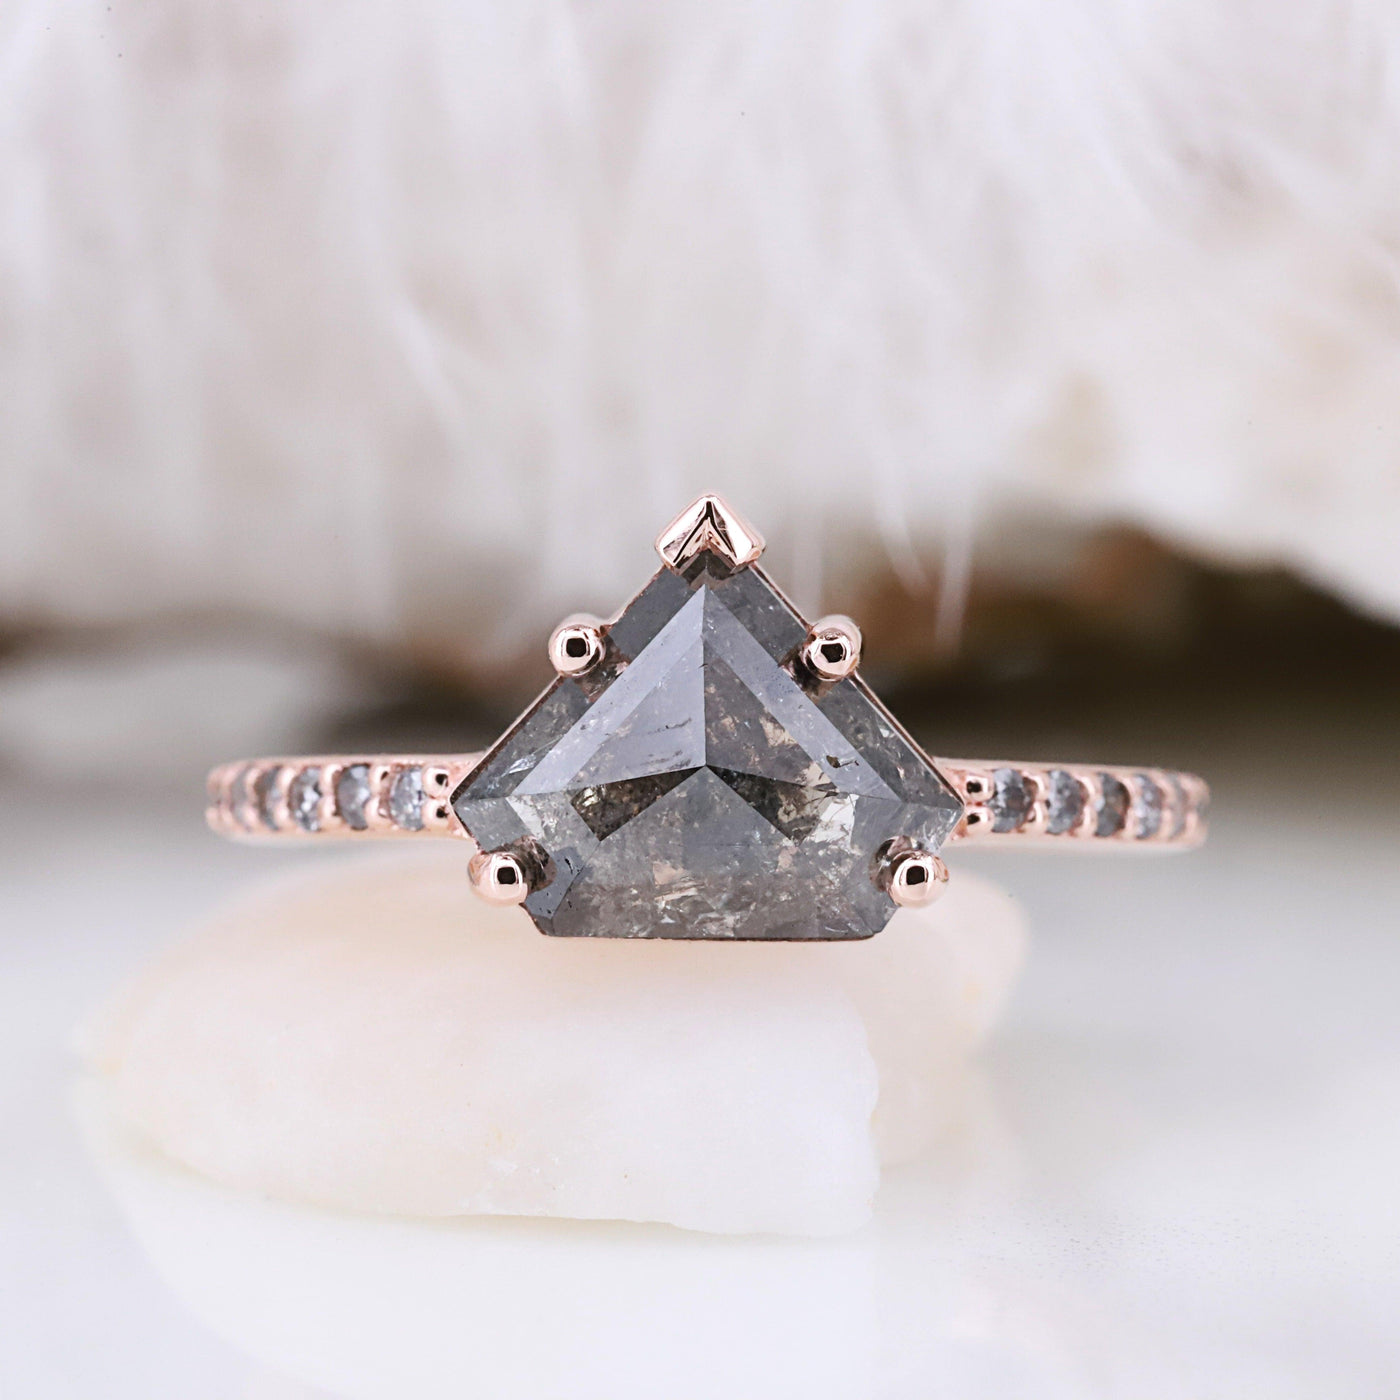 Shop Now for a Unique Salt and Pepper Geometric Diamond Ring | Handcrafted Designer Jewelry for Men and Women | Statement Piece with a Modern Twist